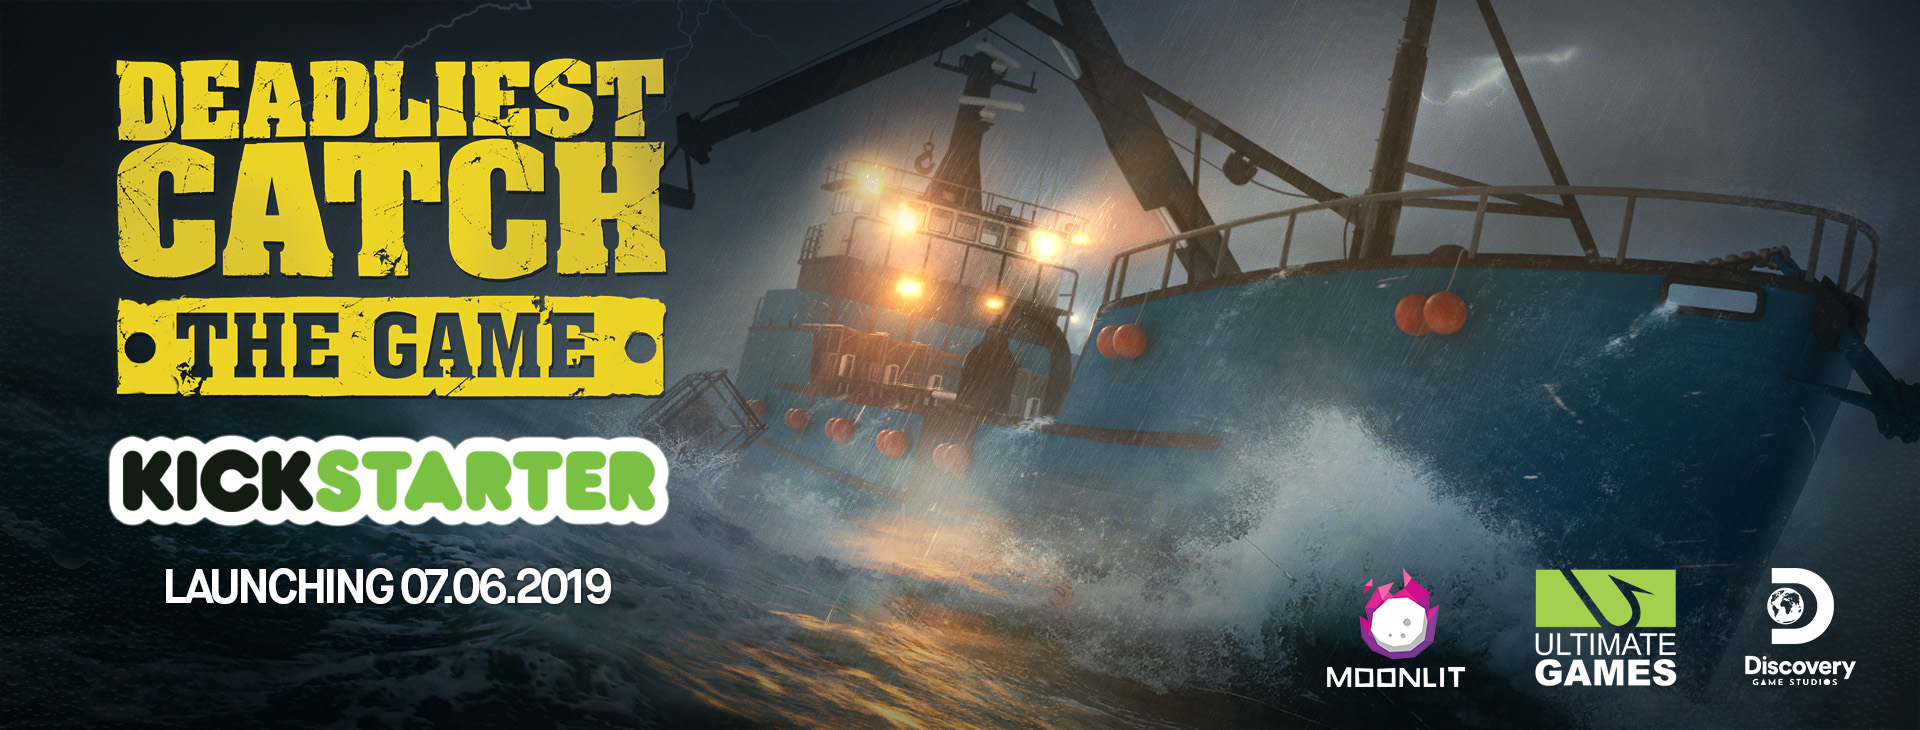 Deadliest Catch The Game Demo